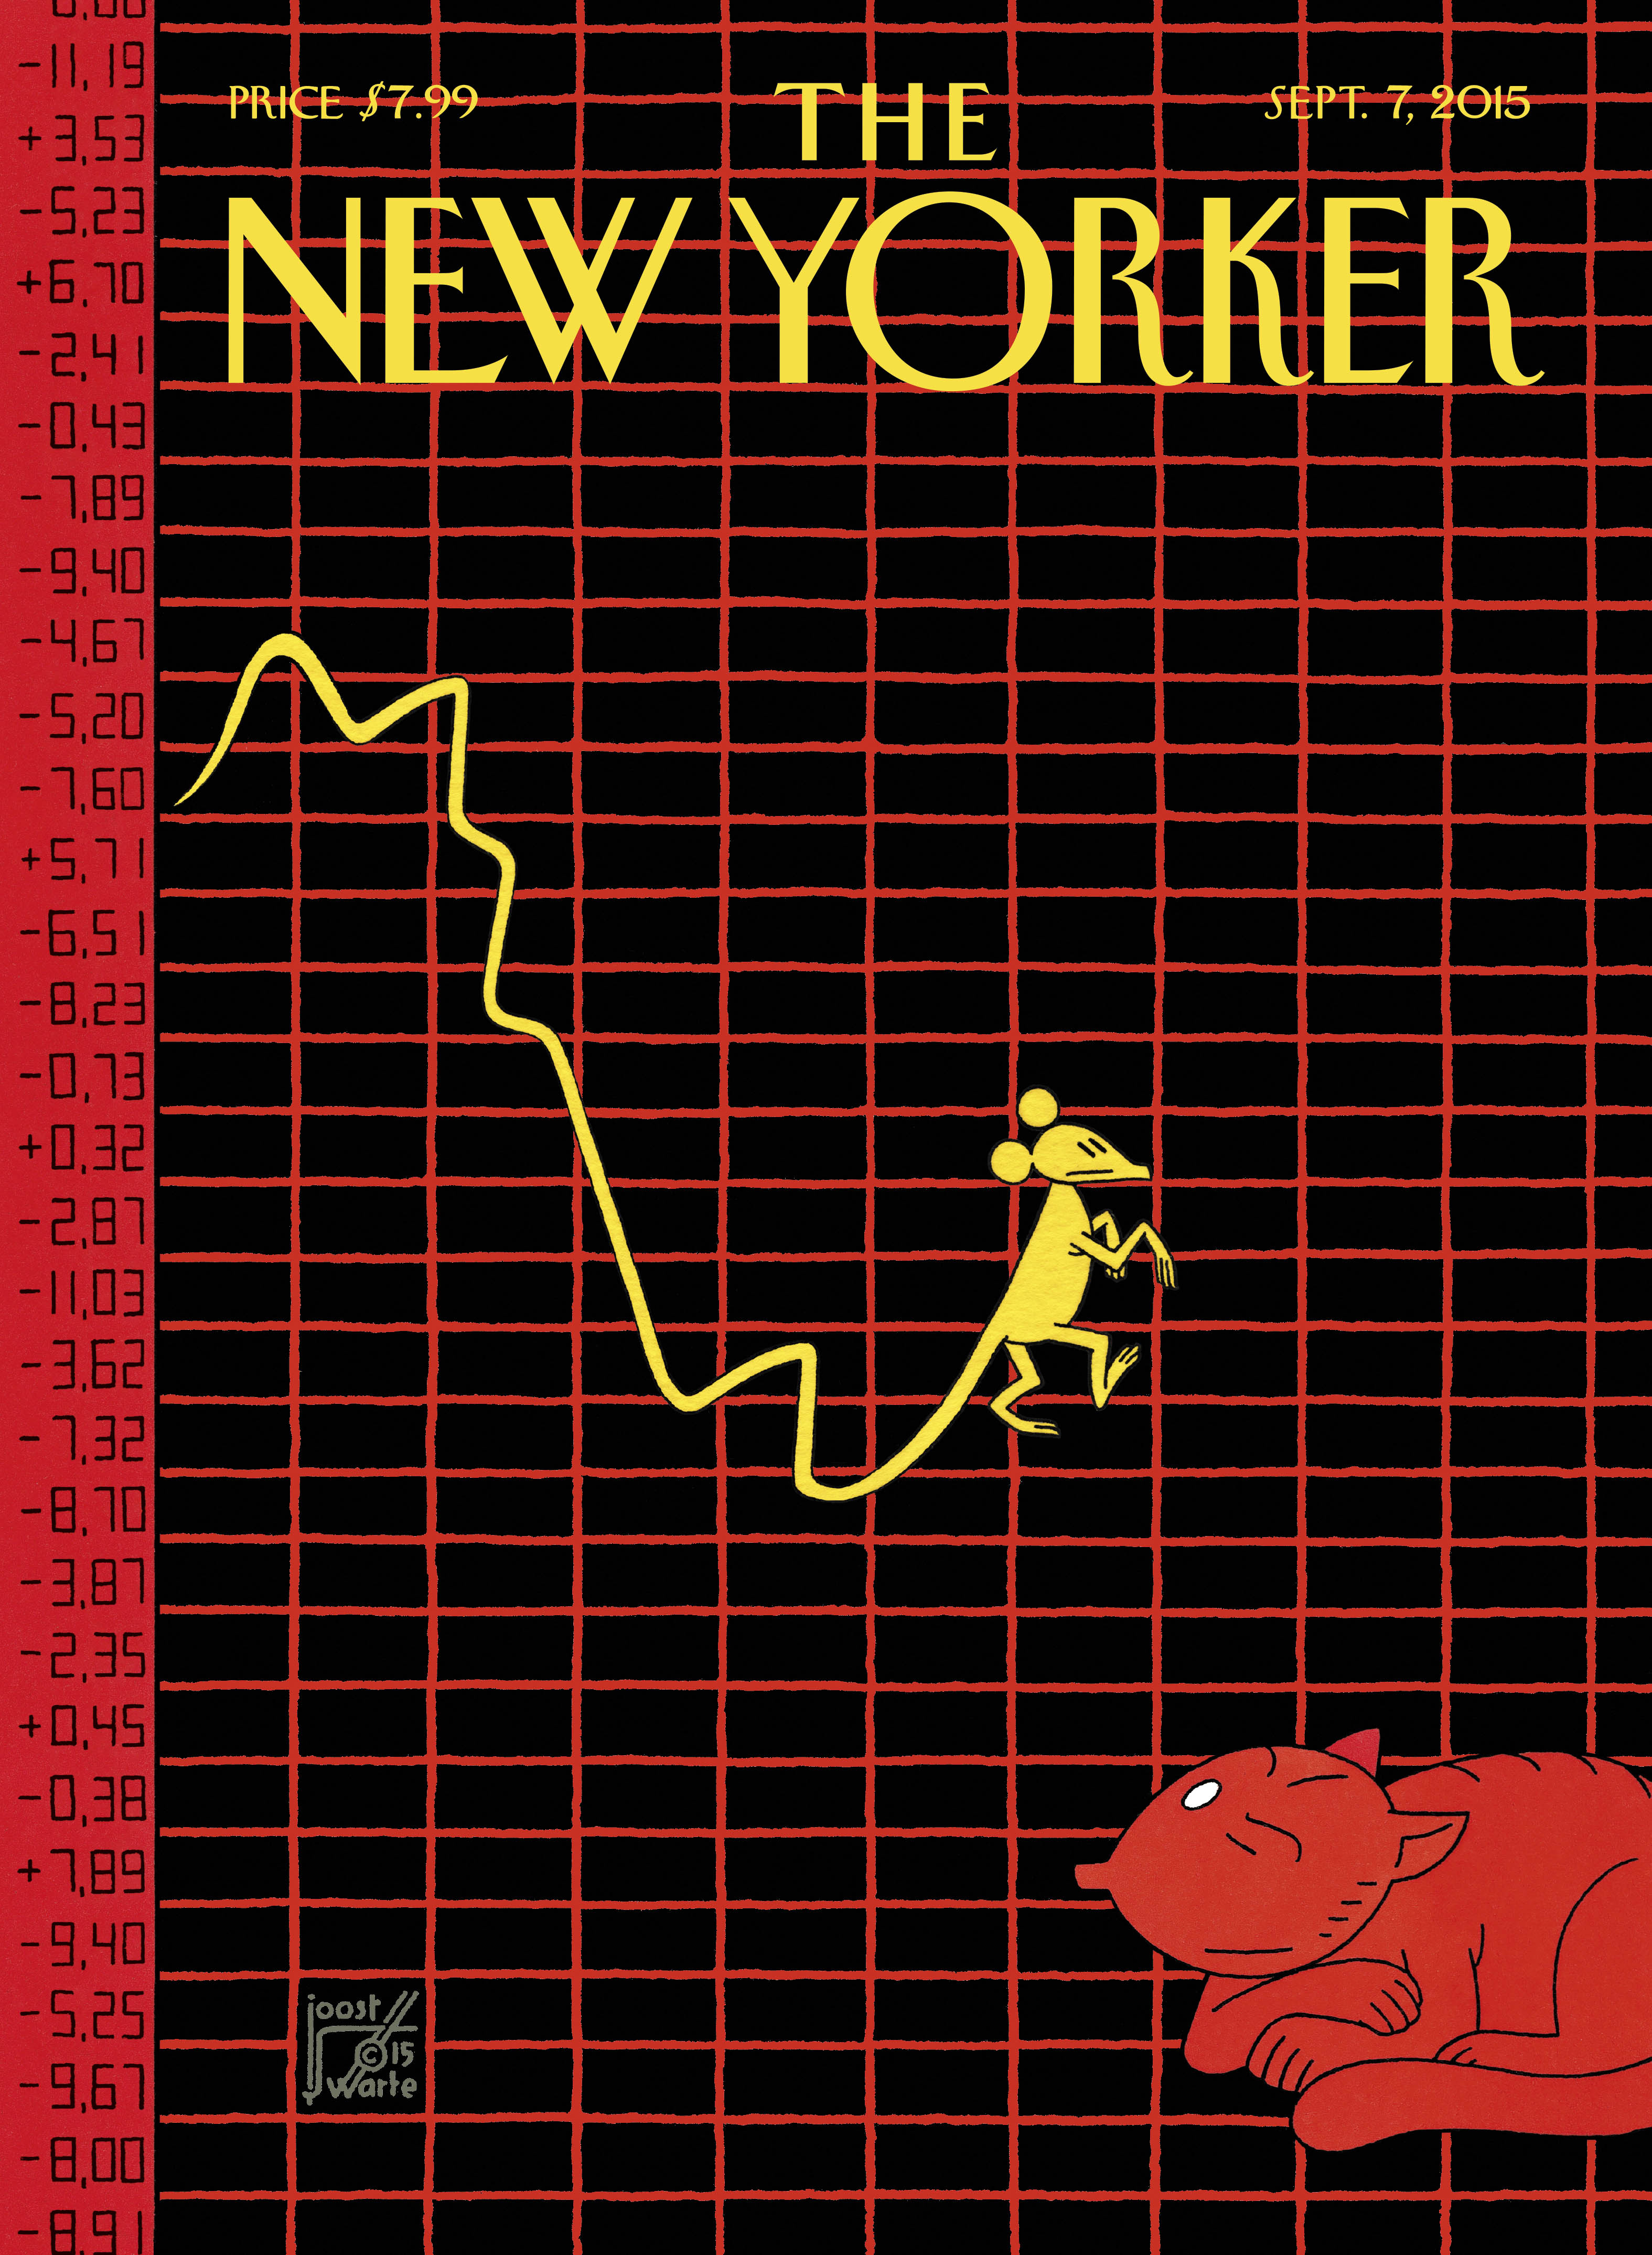 The New Yorker-"The Mouse of Wall Street," September 7